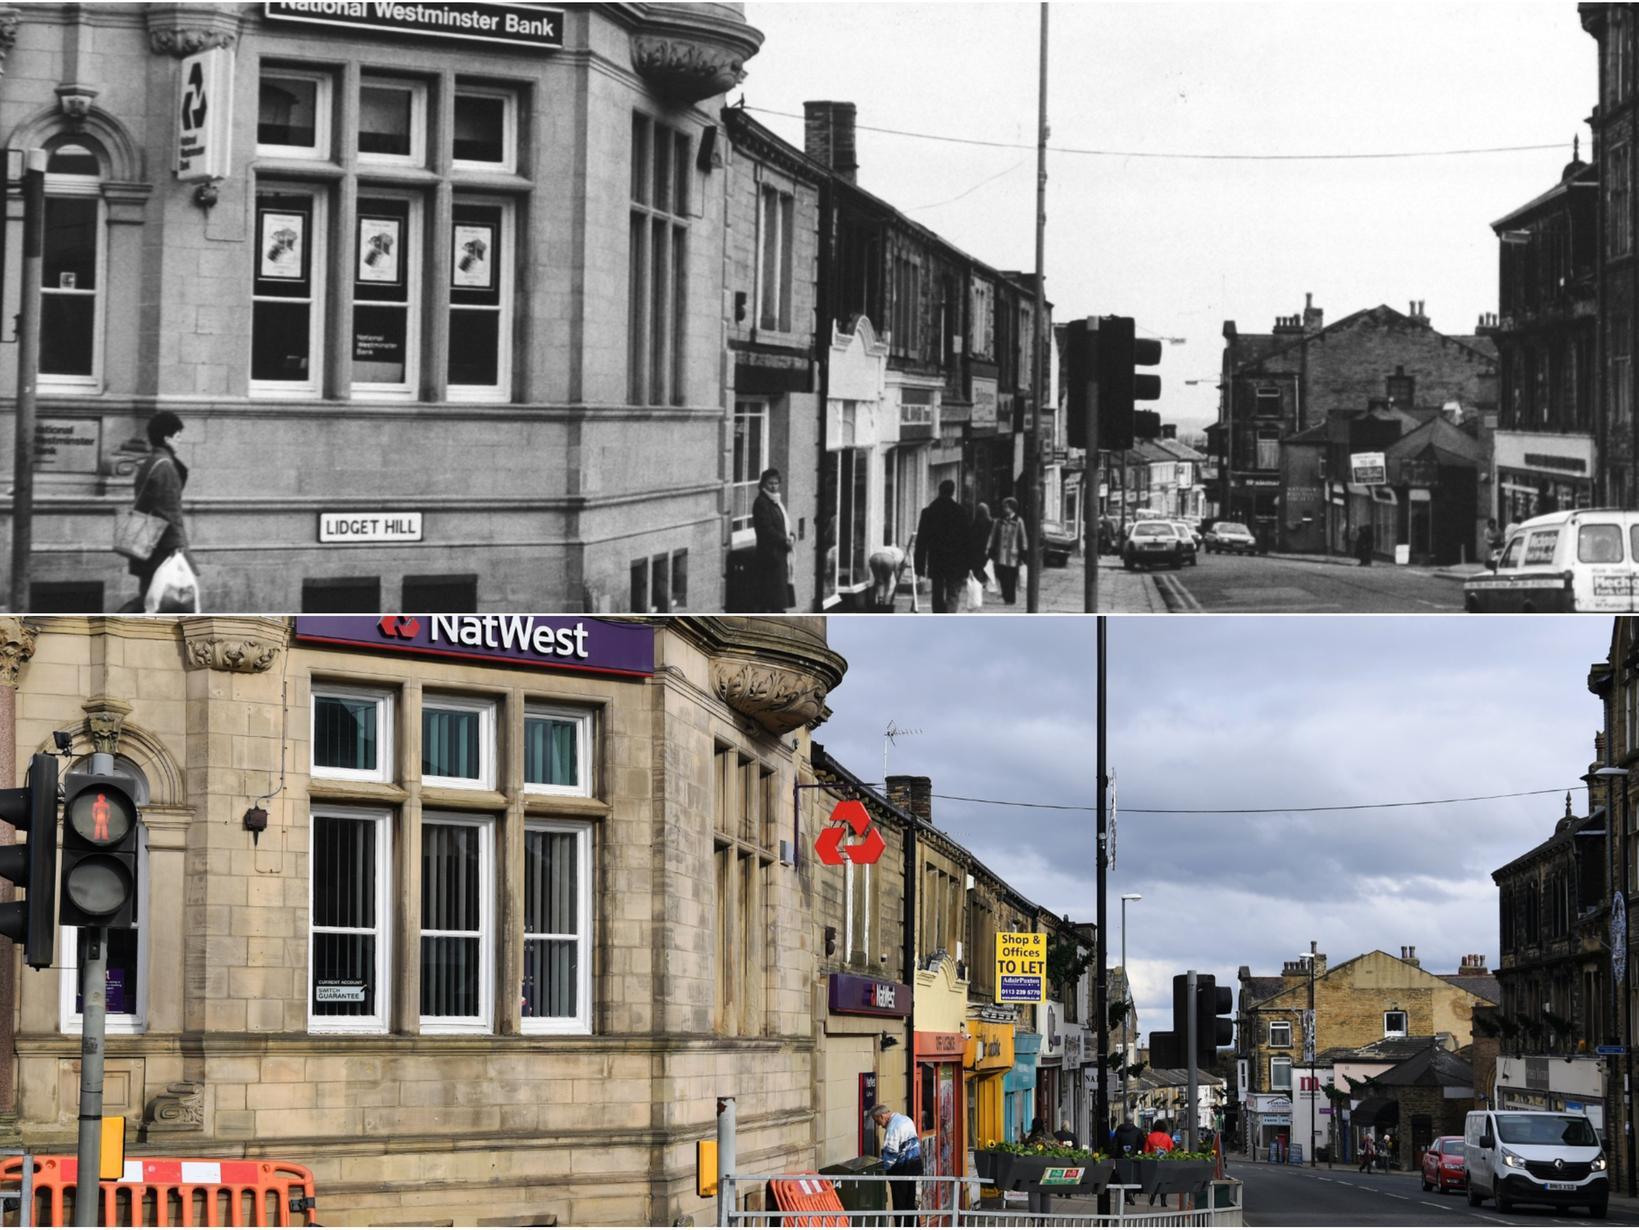 The corner of Lidget Hill looking down towards Lowtown in 1987 and 2019.